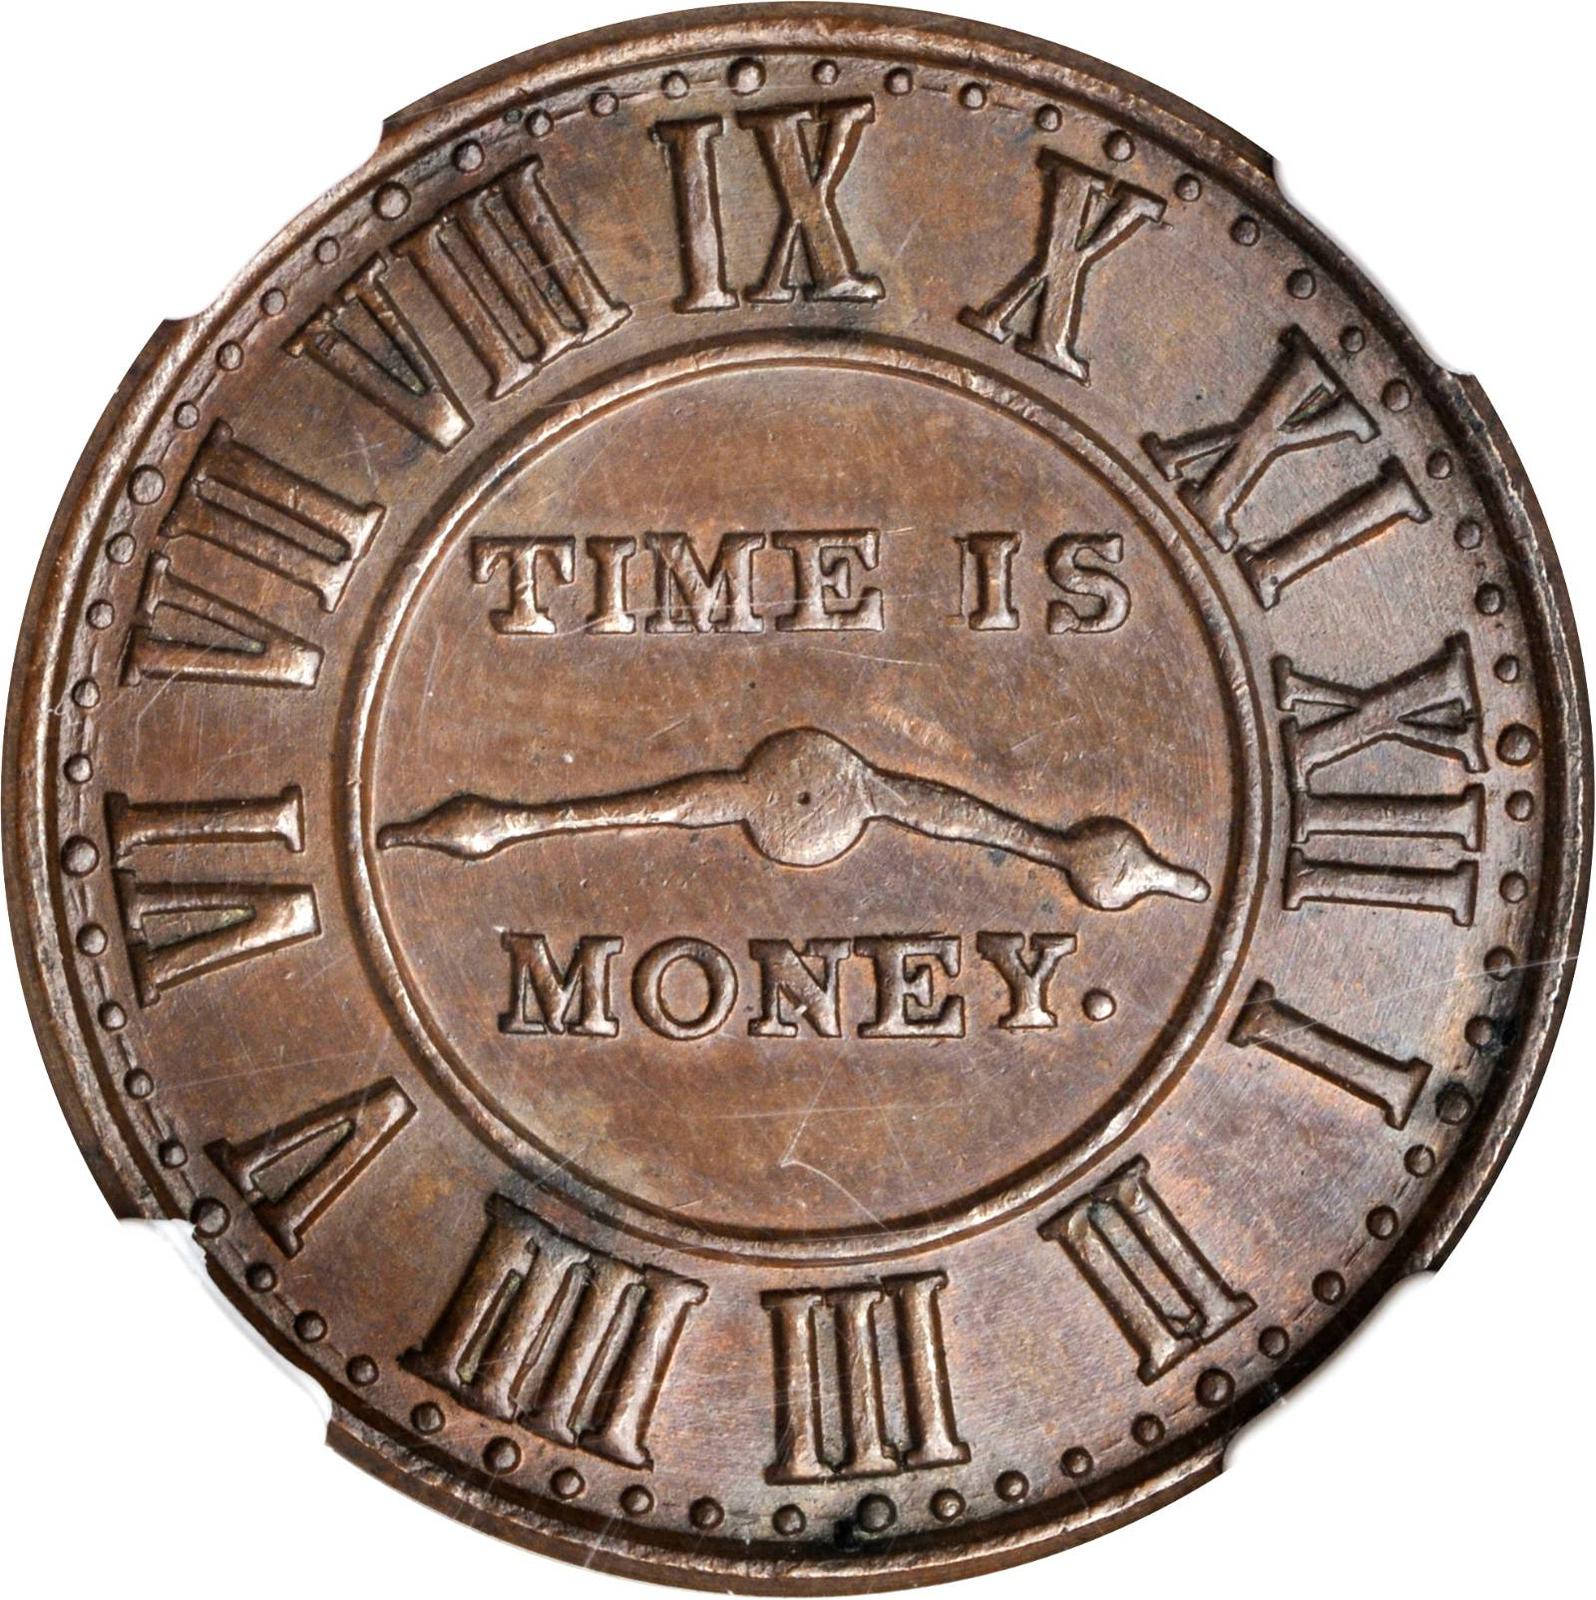 TimeCoinProtocol